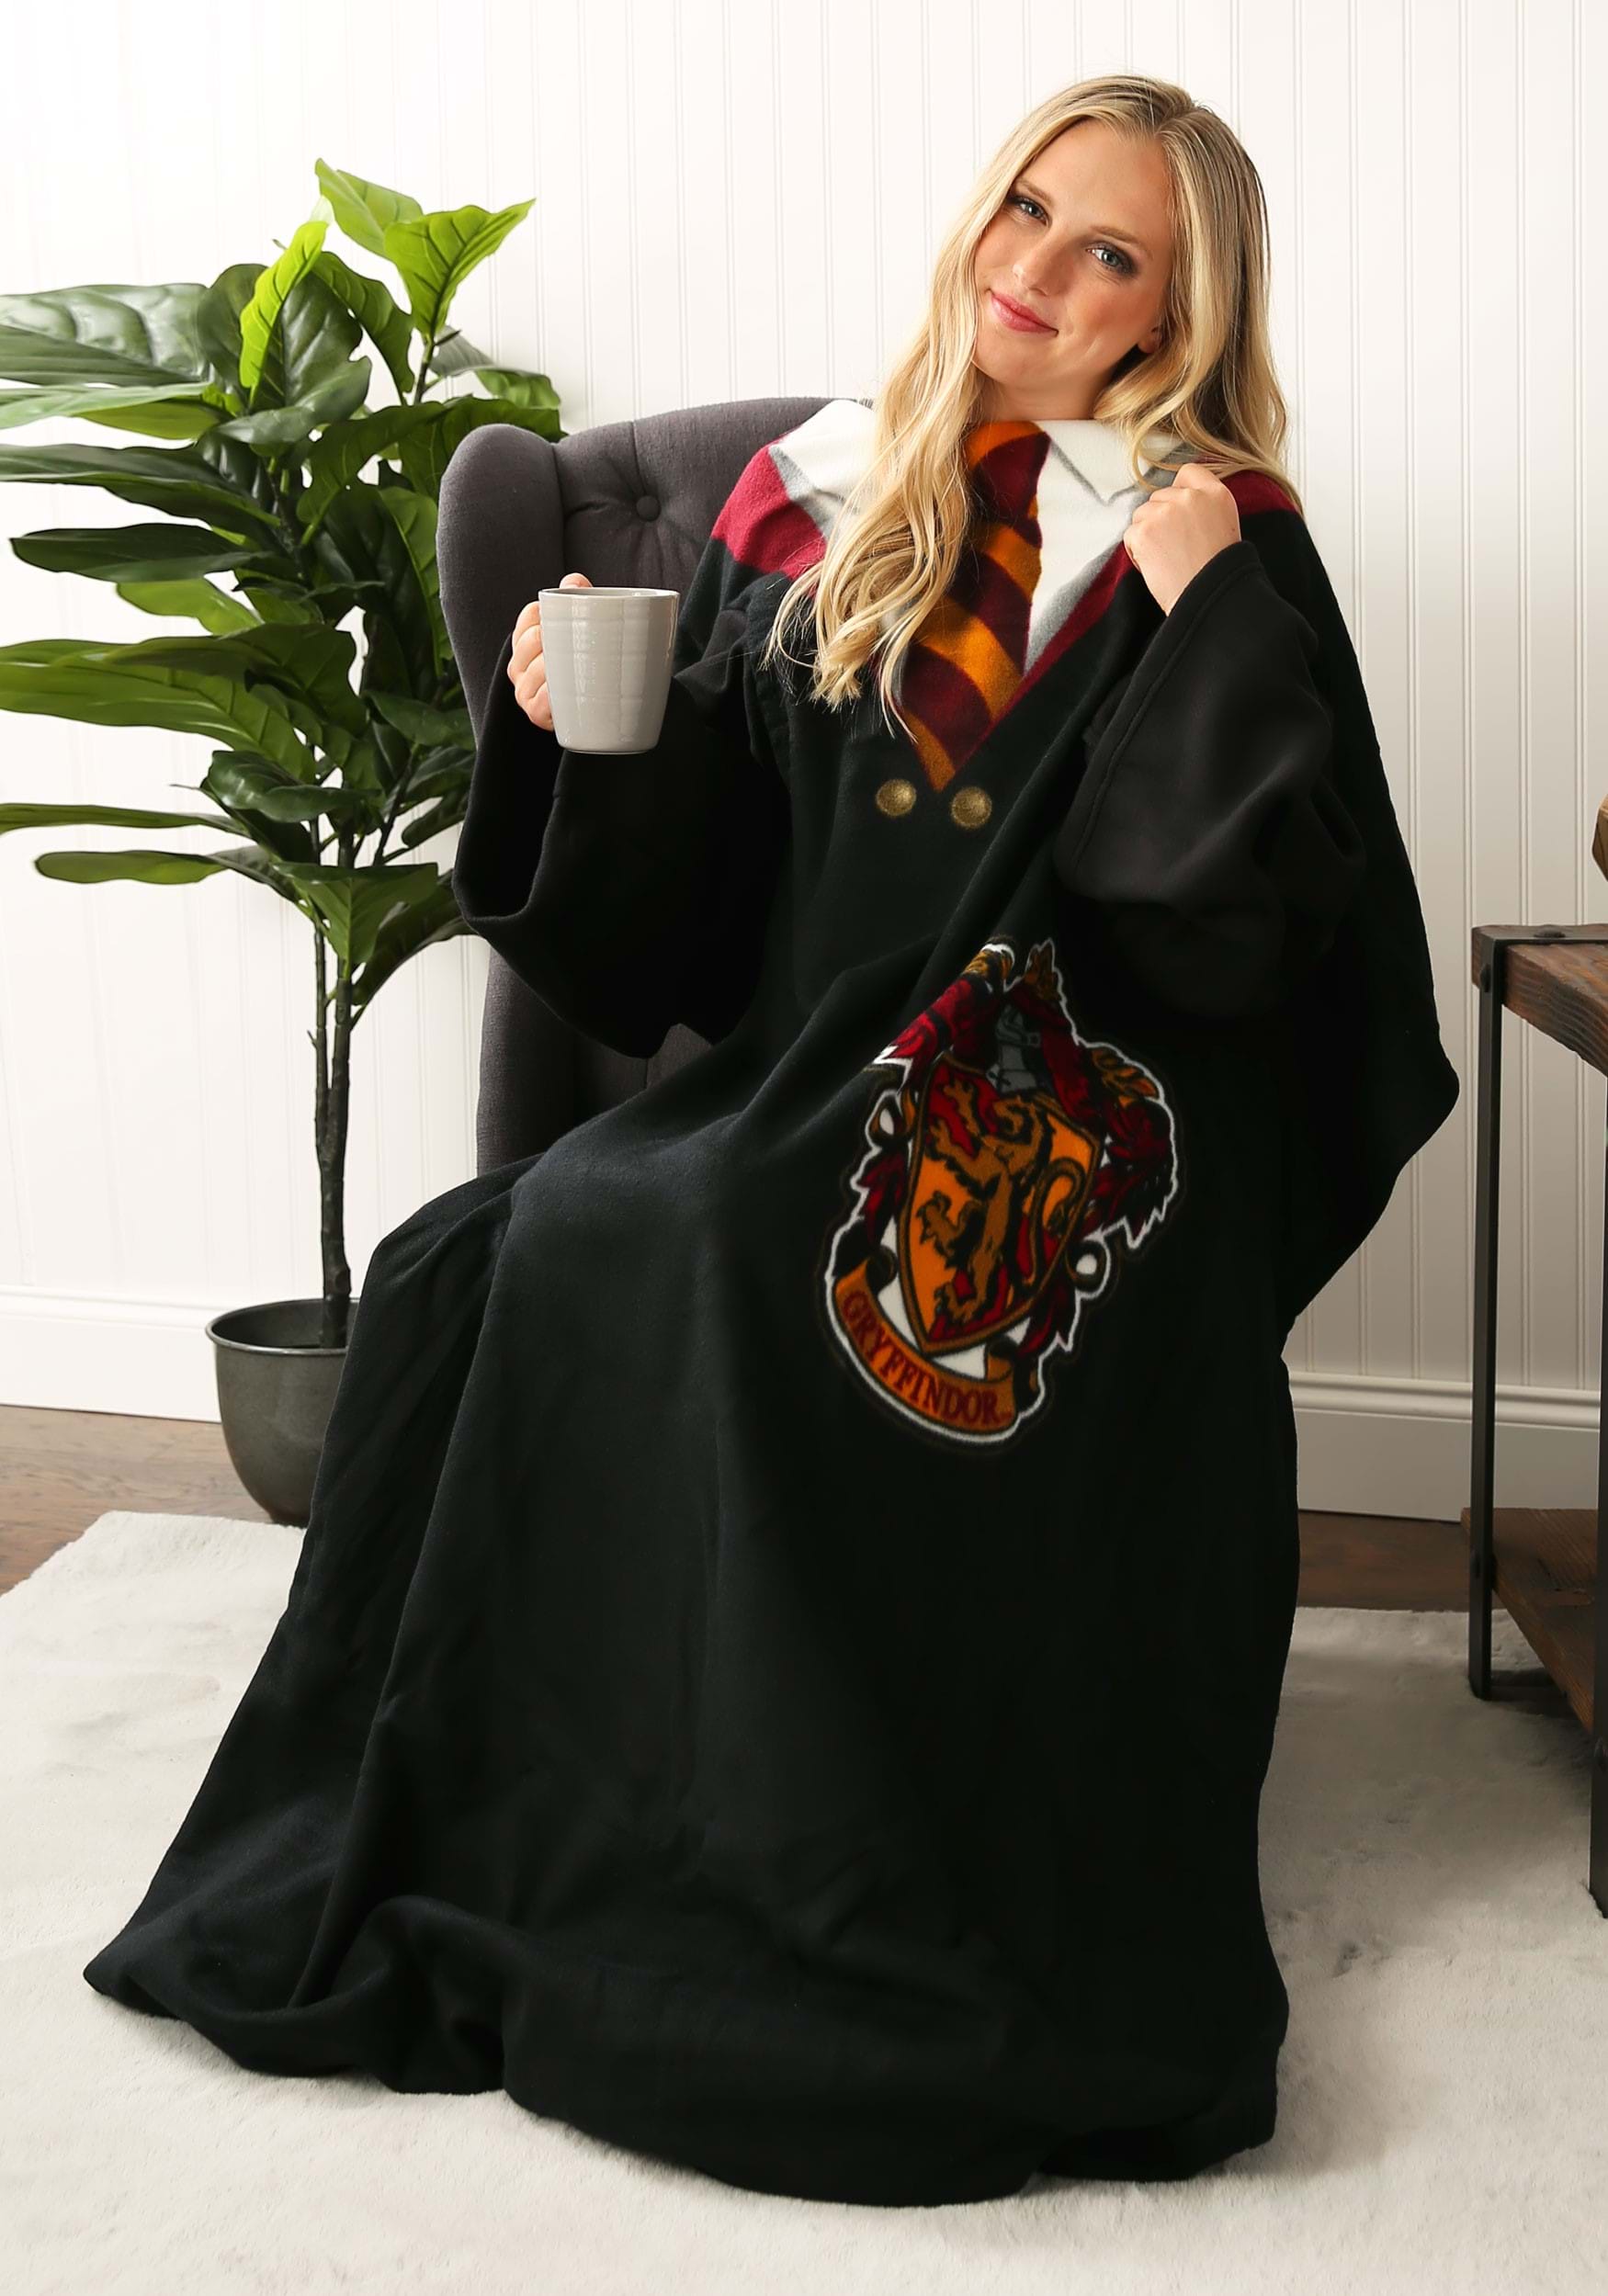 Wizard Costumes, How To Throw A Hogwarts Halloween Party